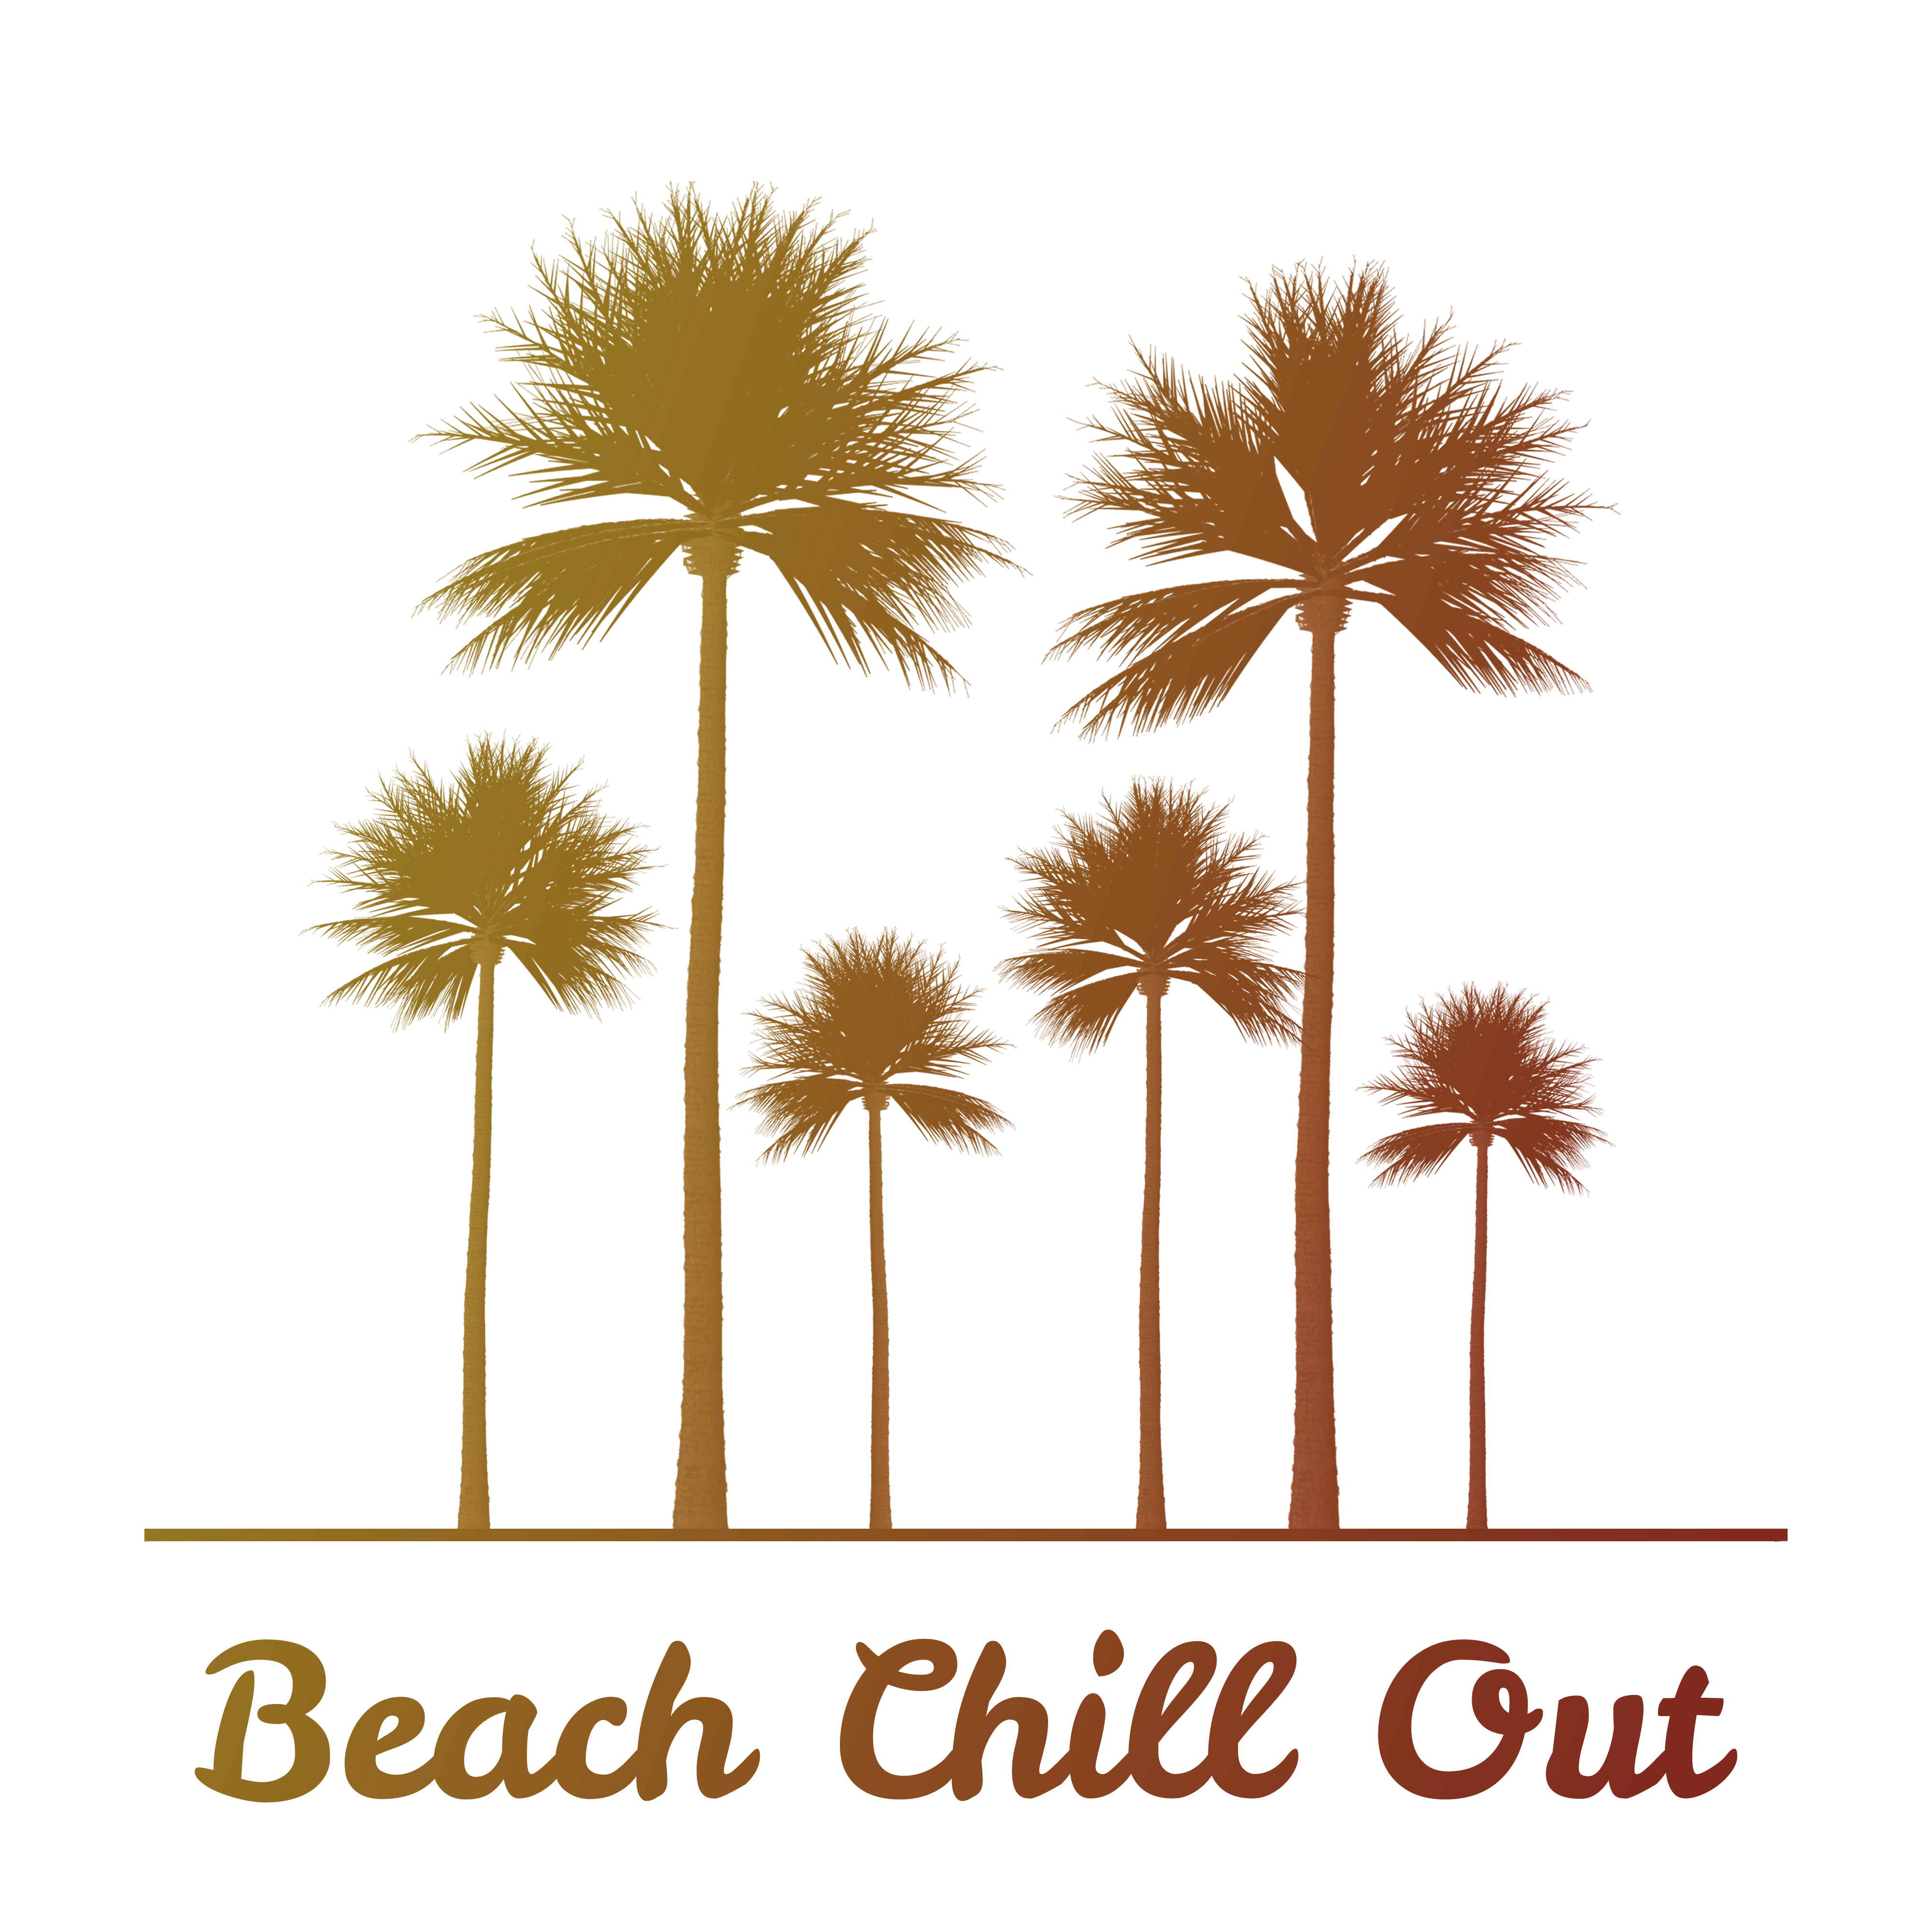 Beach Chill Out  Relax on Tropical Island, Holiday Relaxation, Summer Vibes, Cold Cocktails